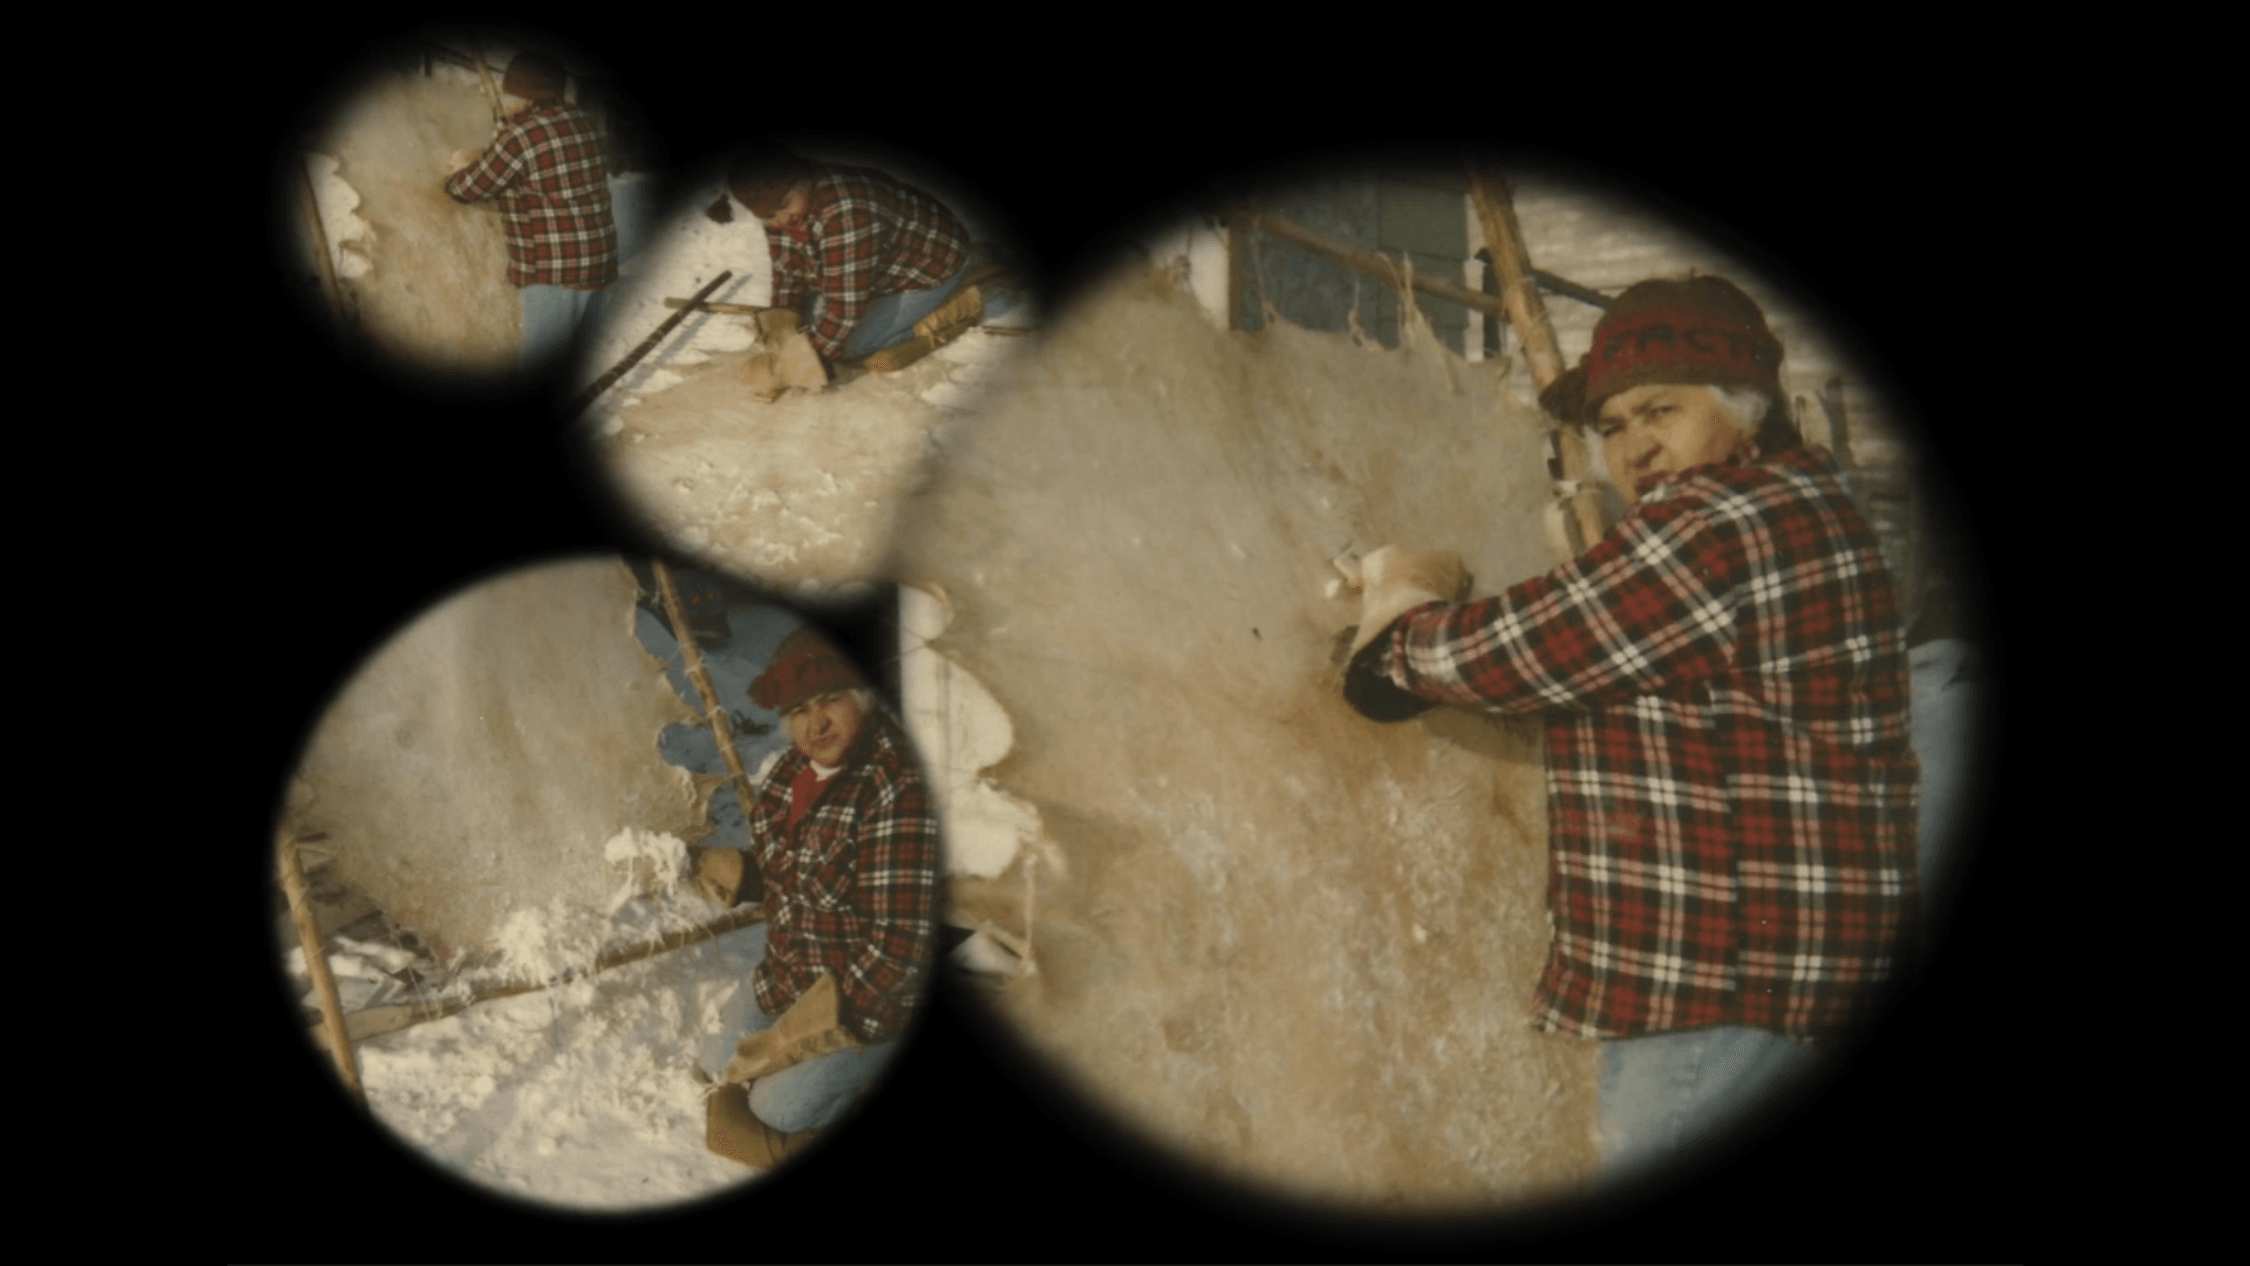 Viewed through multiple circular vignettes, the image captures an individual engaged in the process of hide tanning. The person is wearing a red plaid jacket and a warm cap, indicating a cold environment with snow on the ground. They are using tools to scrape and work on the hide, which is stretched out on a frame. Each circular frame overlaps to create a collage effect, showcasing different stages or angles of the hide tanning process.